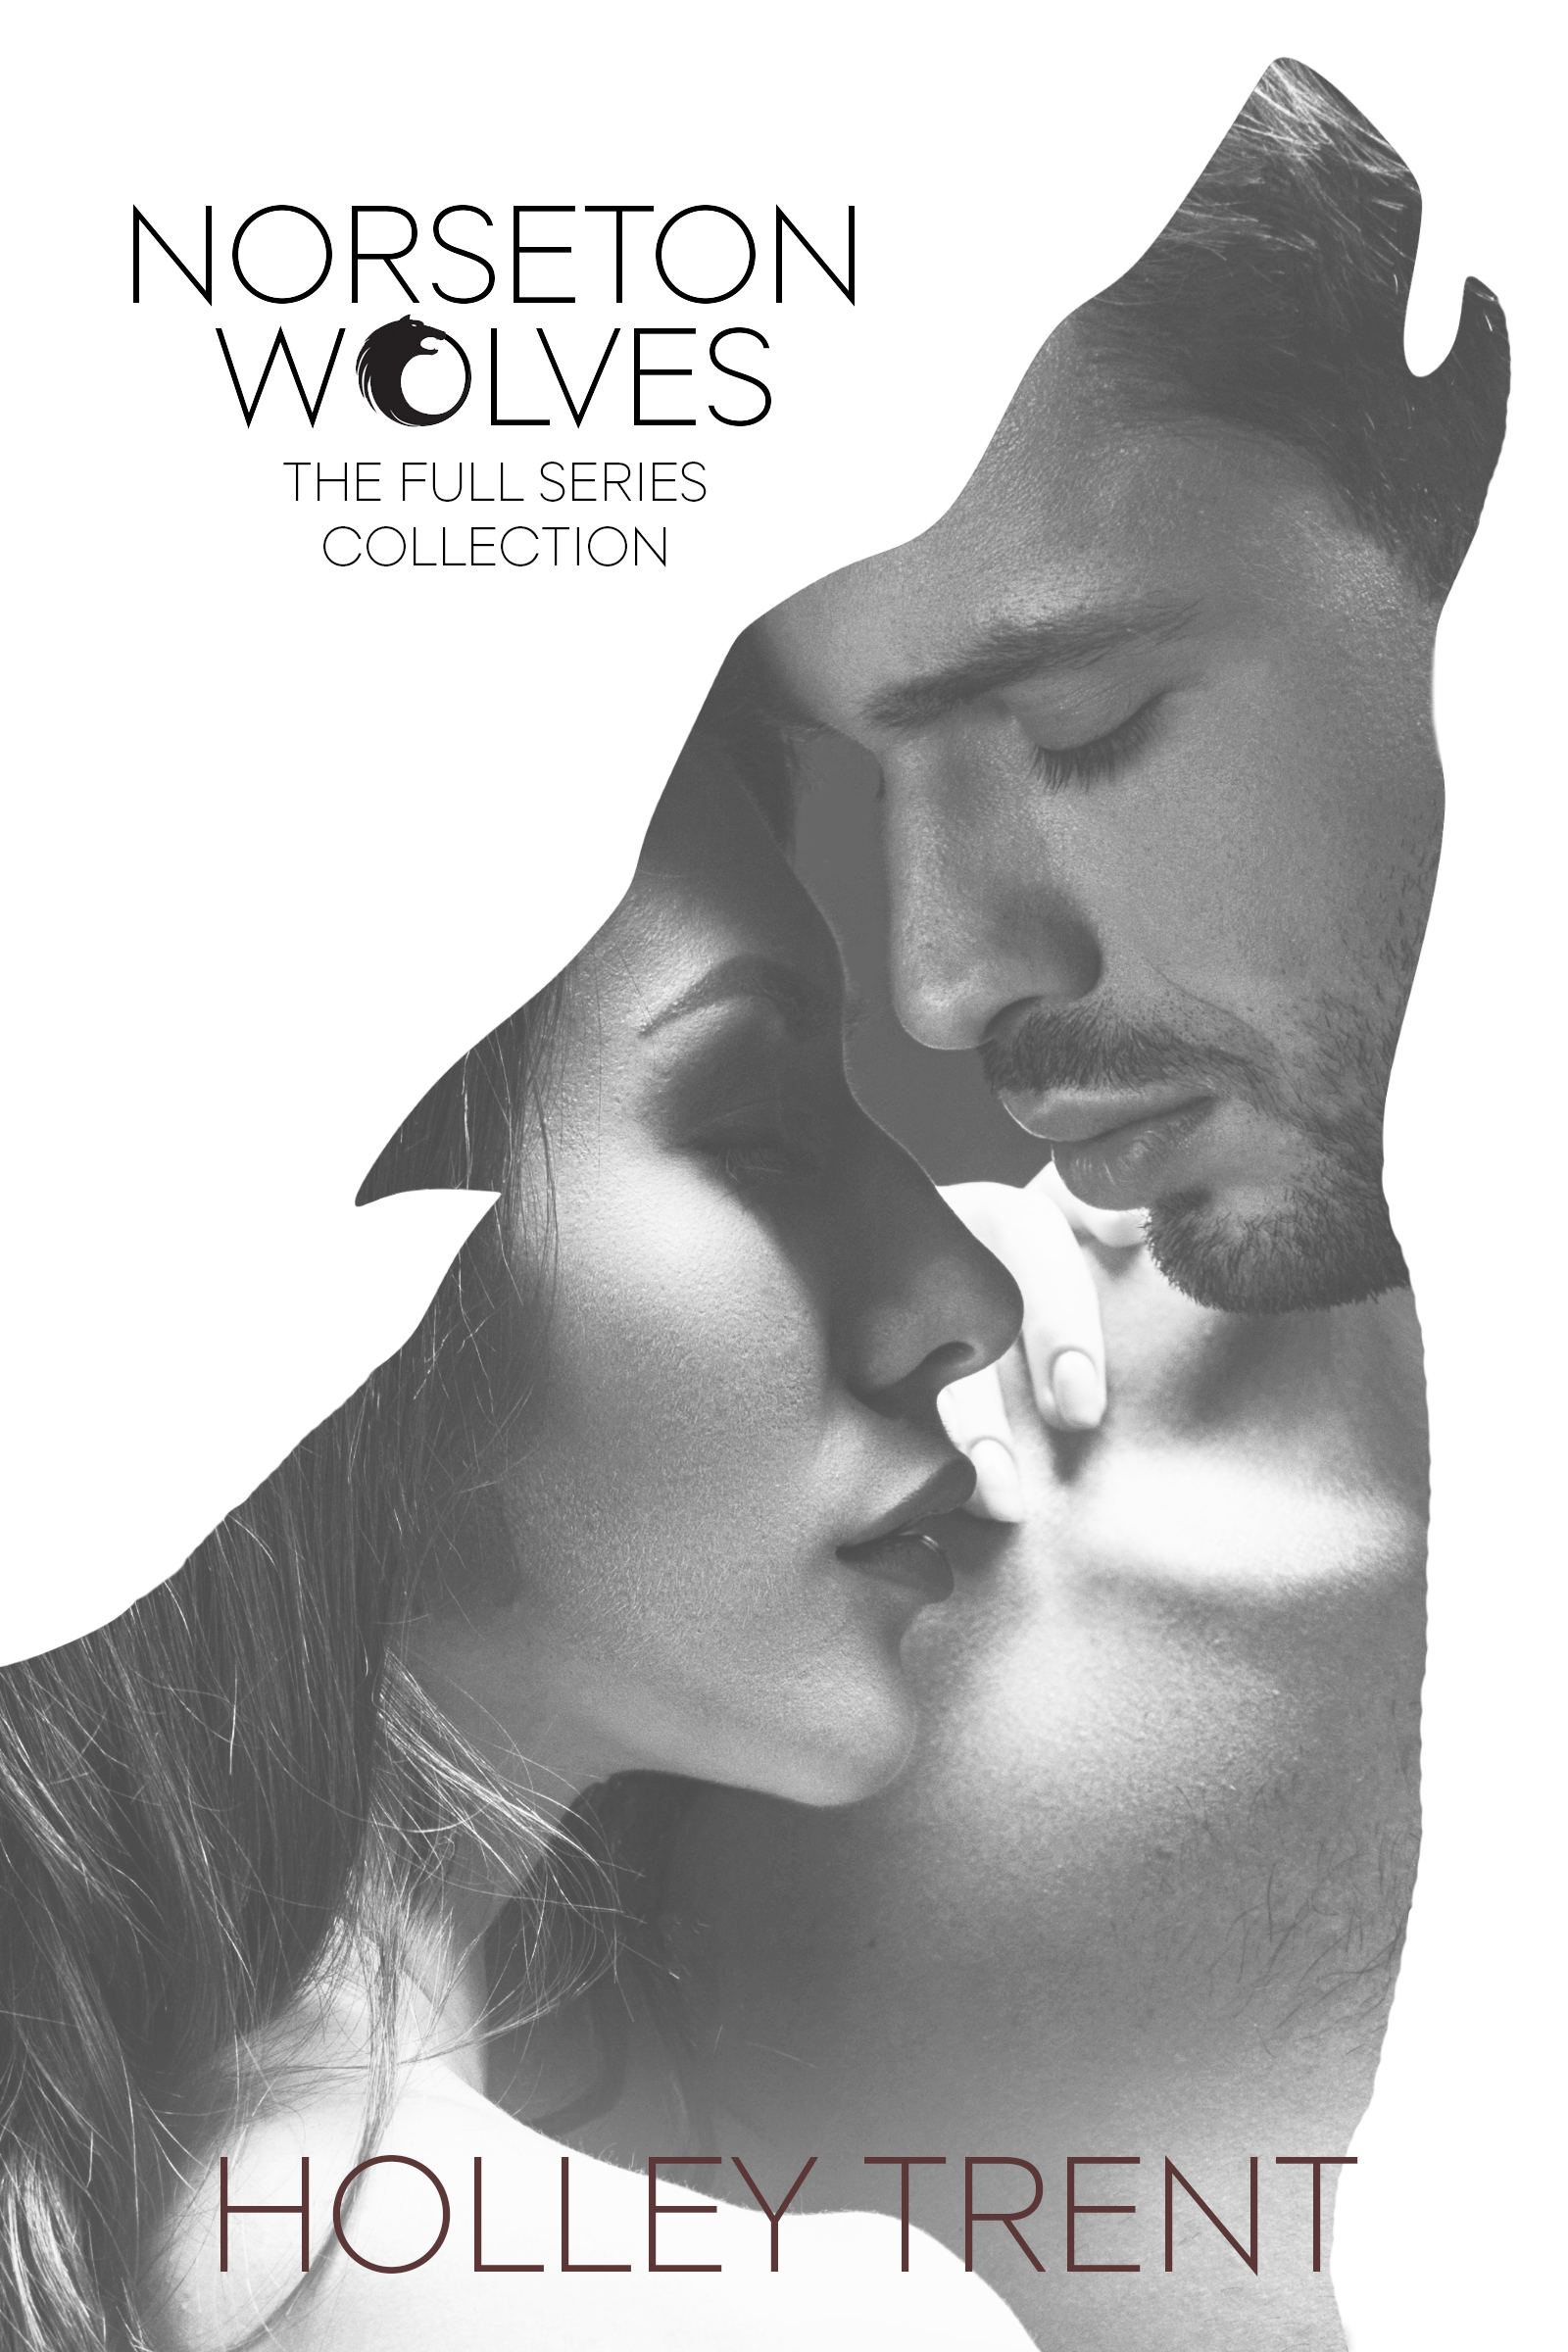 cover of Holley Trent's werewolf series cover for Norseton Wolves has a silhouette of a howling wolf inset with an embracing couple